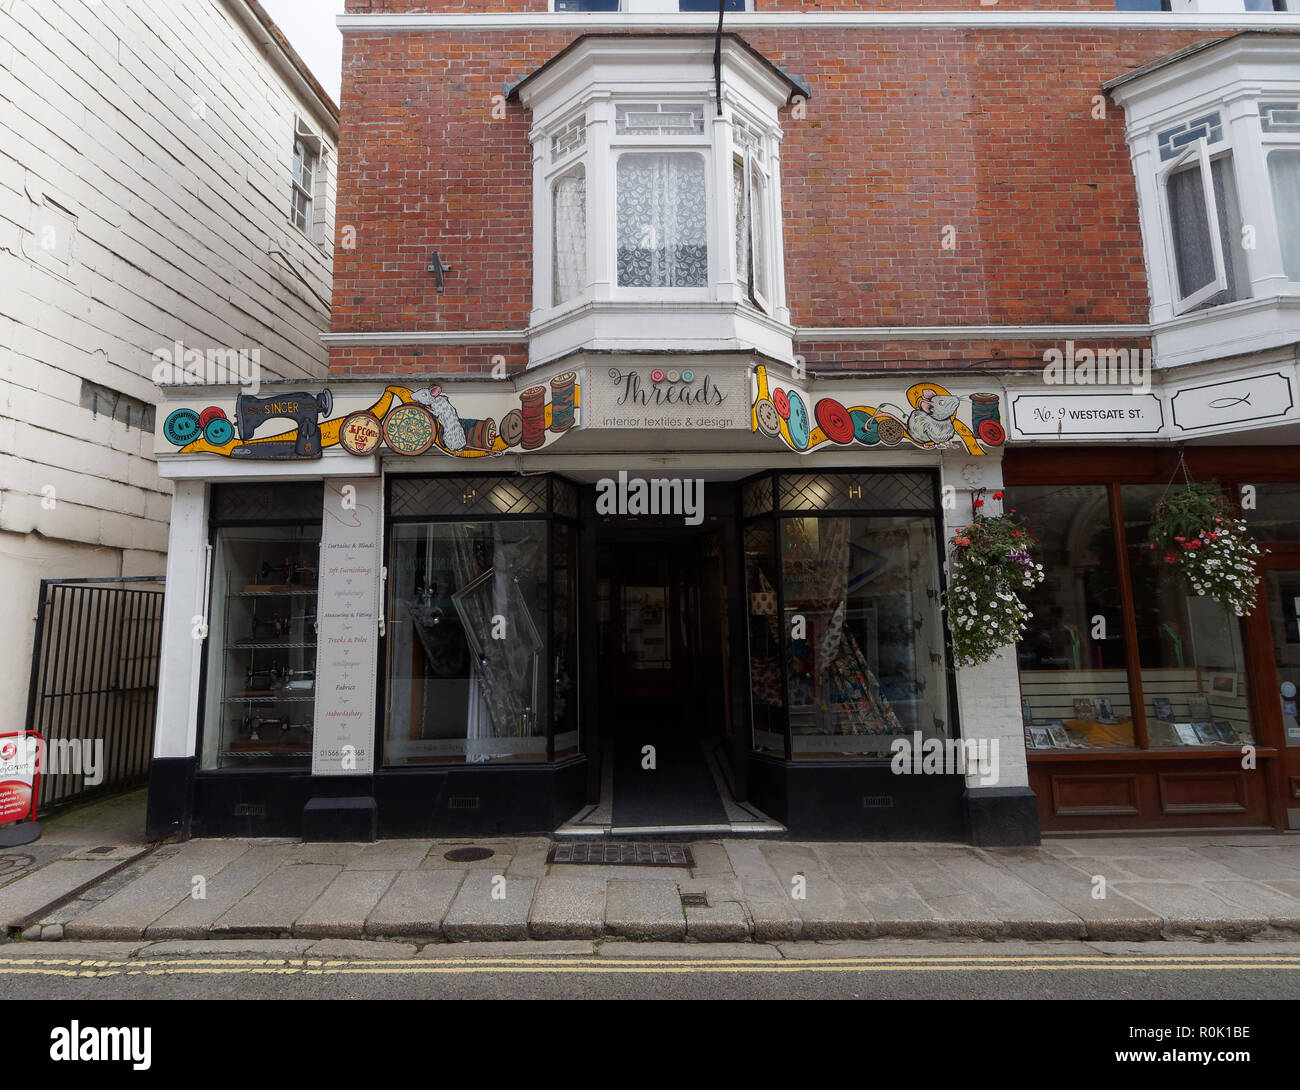 Launceston Shop fronts Independent and chain. 5th November 2018, Robert Taylor/Alamy Live News.  Newquay, Cornwall, UK. Stock Photo